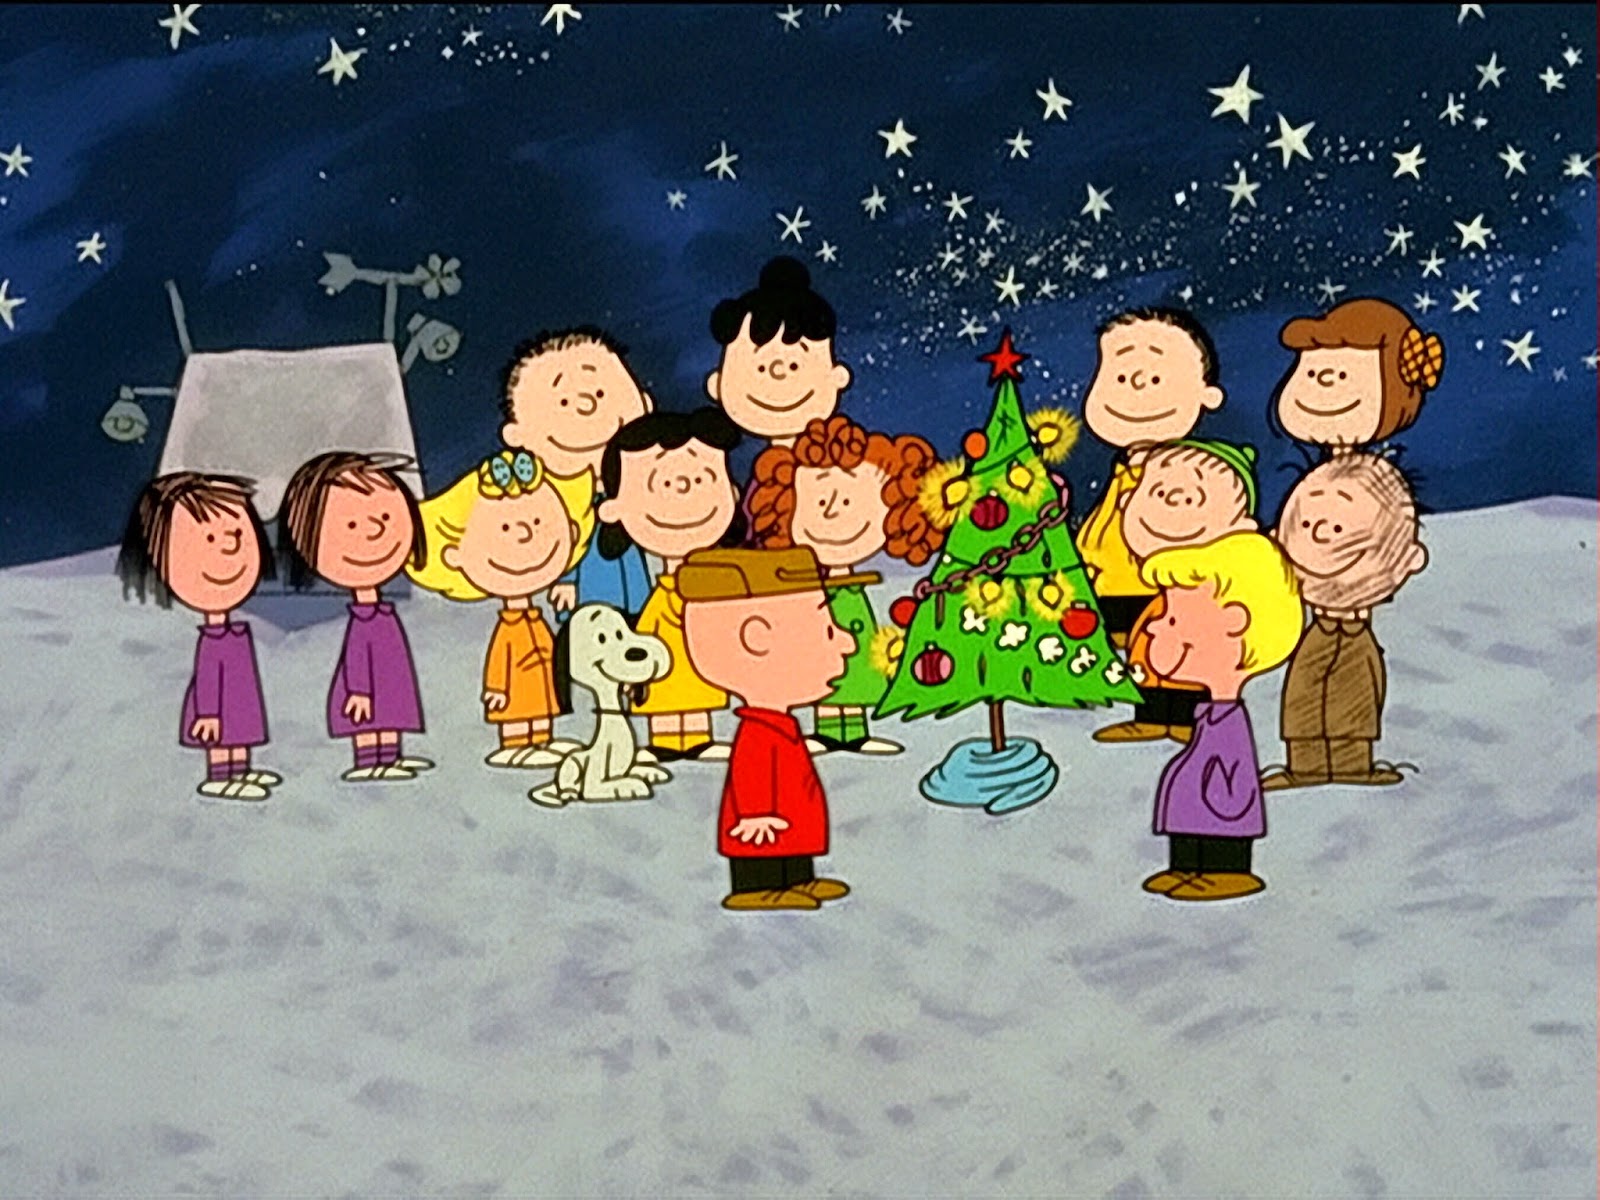 http://catalog.syossetlibrary.org/search?/tcharlie+brown+christmas/tcharlie+brown+christmas/1%2C3%2C5%2CB/frameset&FF=tcharlie+brown+christmas&2%2C%2C3